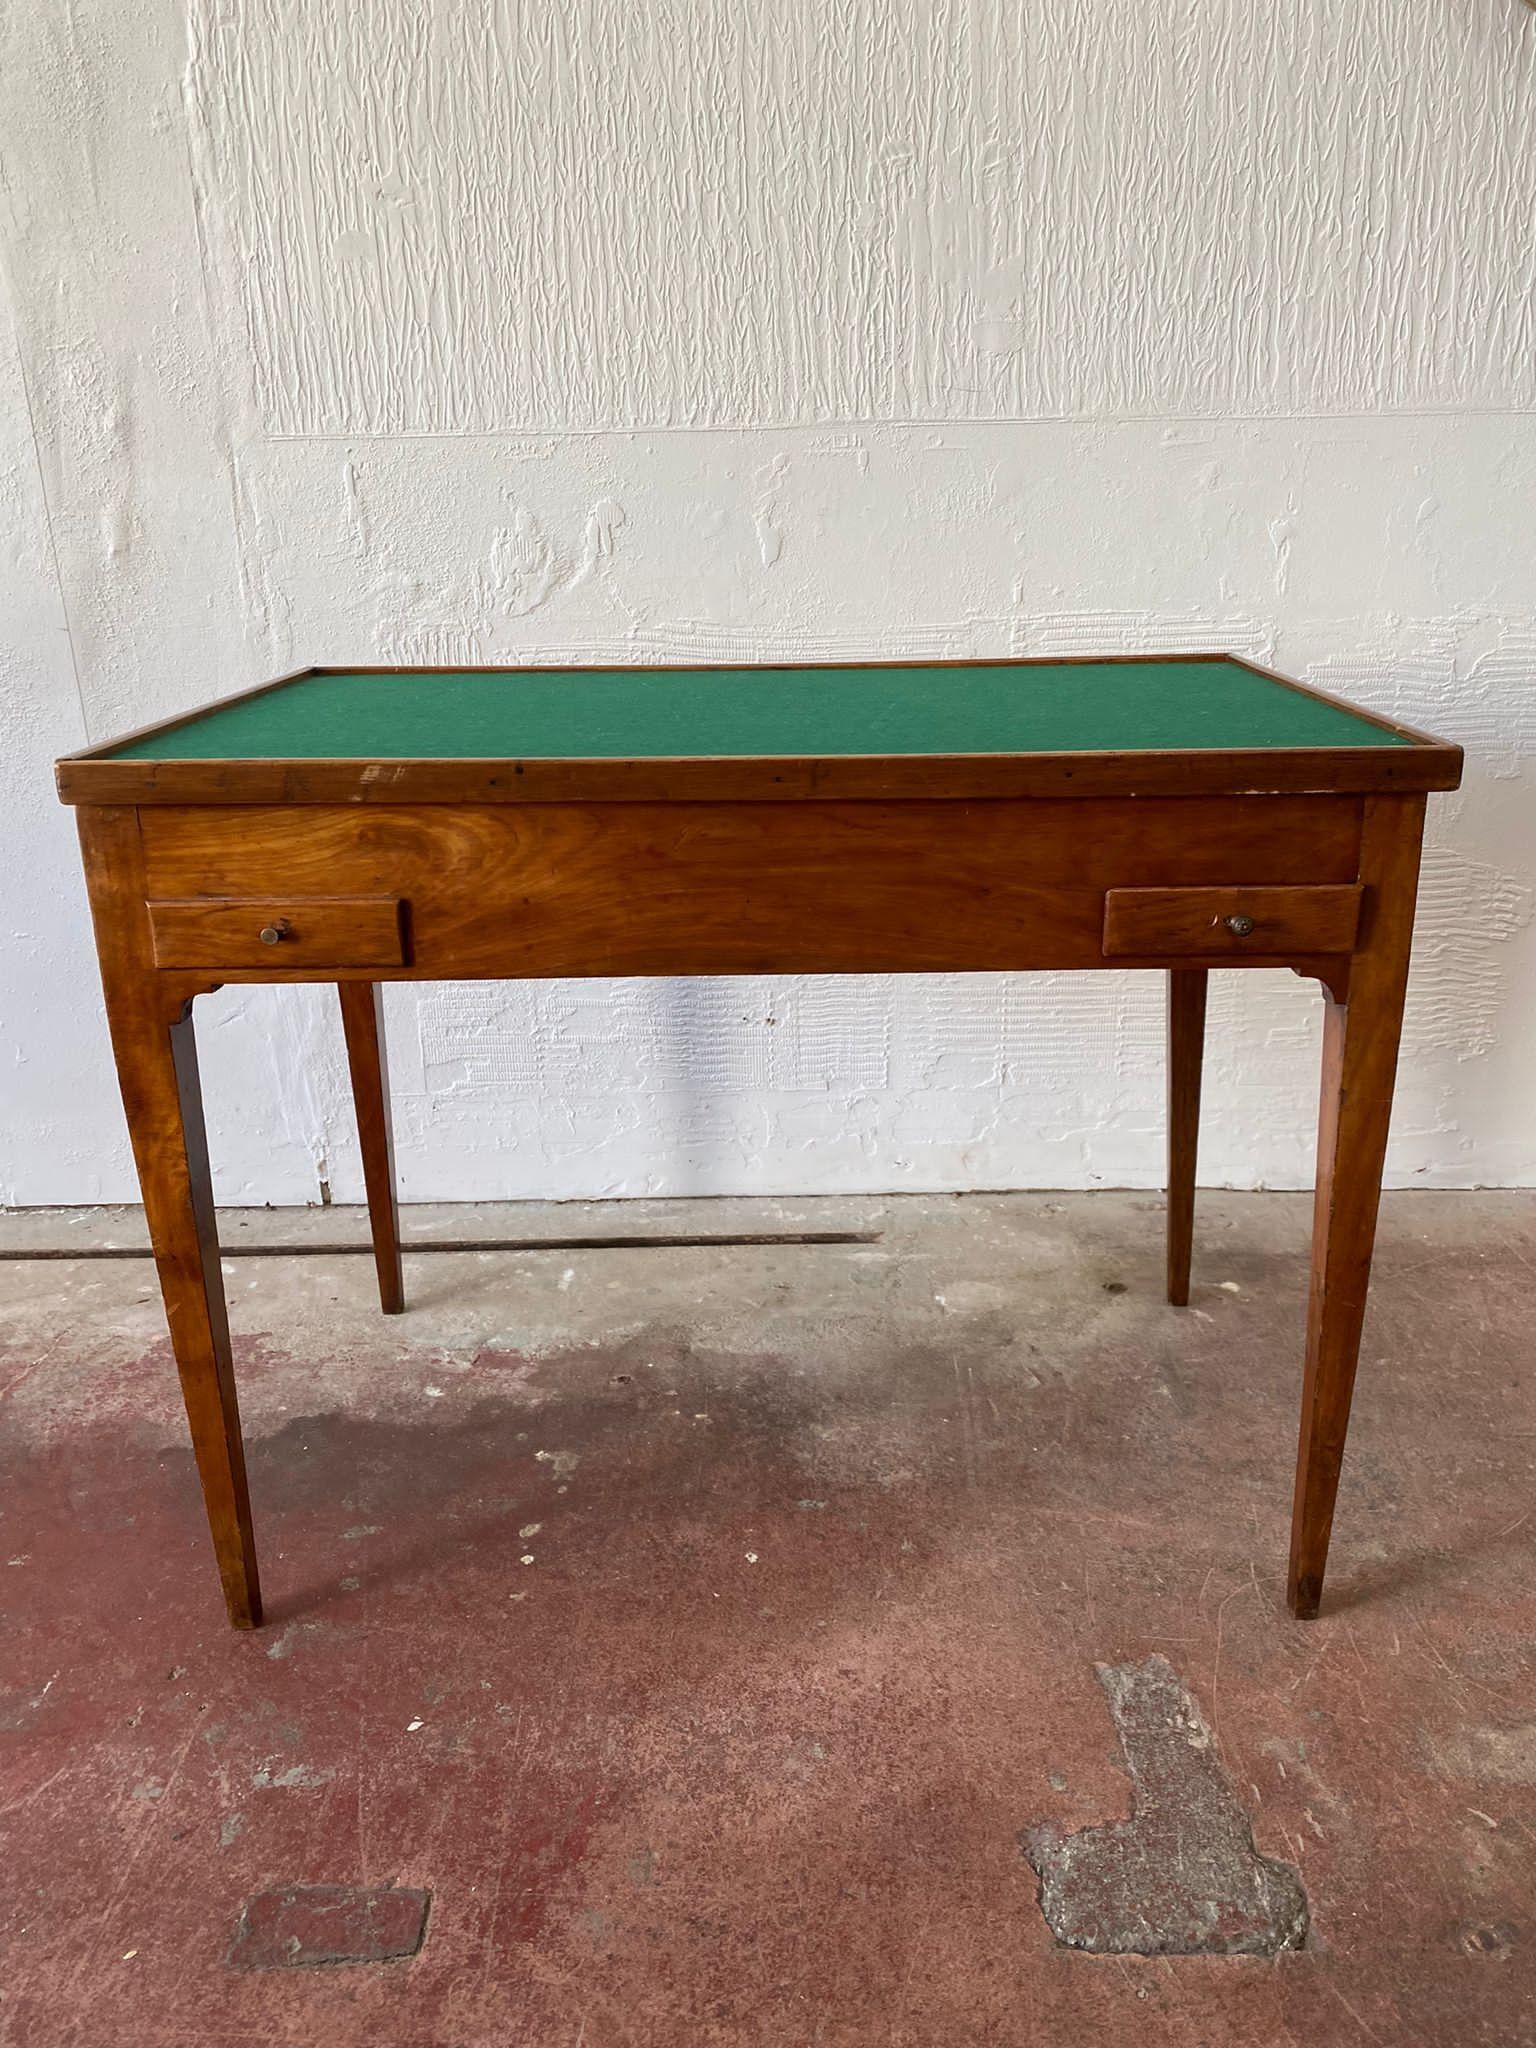 French Provincial Tric Trac Games Table or Writing Desk Console  In Good Condition For Sale In Somerton, GB